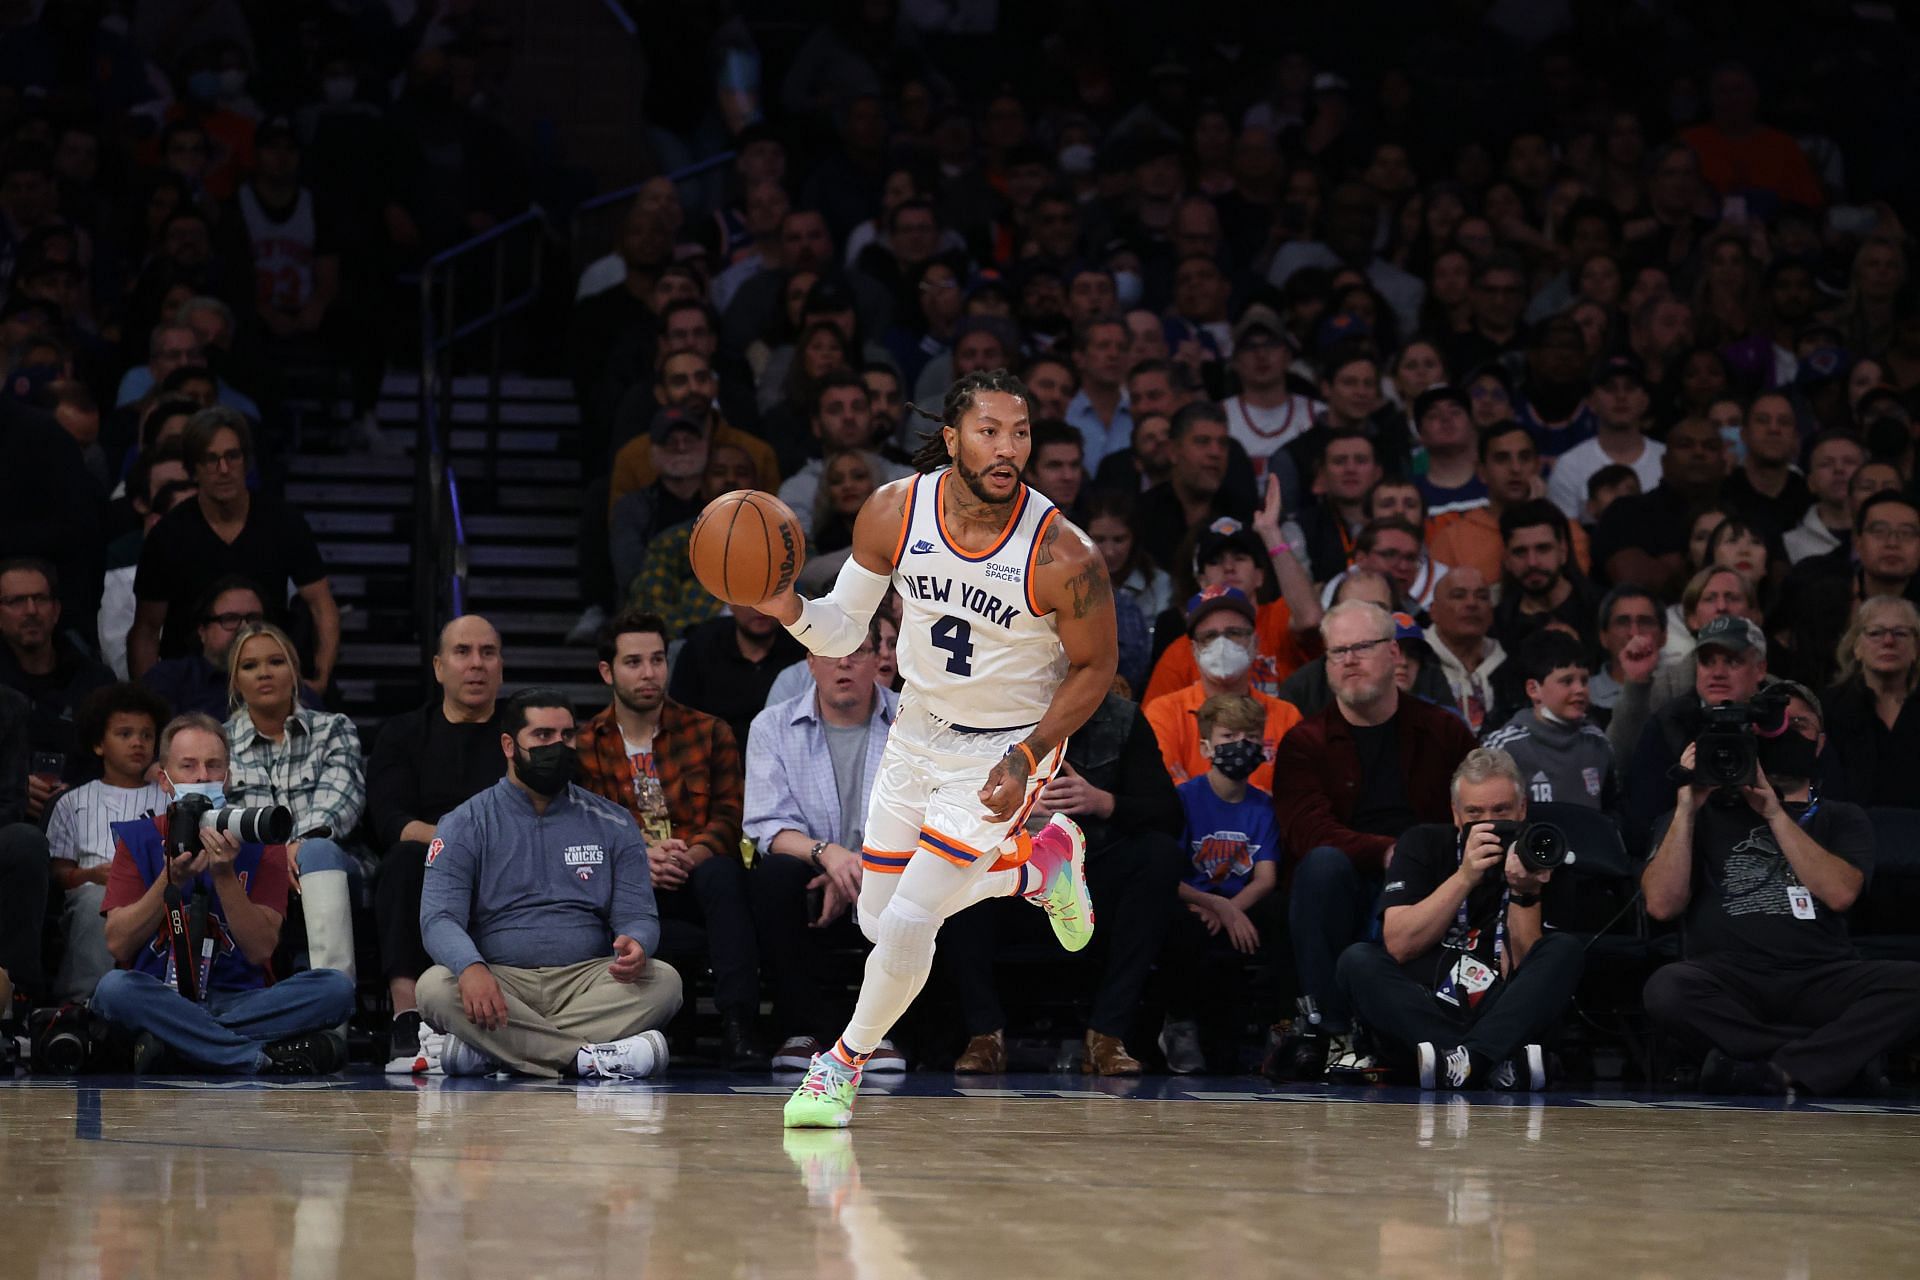 Derrick Rose #4 of the New York Knicks in action against the Milwaukee Bucks during their game at Madison Square Garden on November 10, 2021 in New York City.